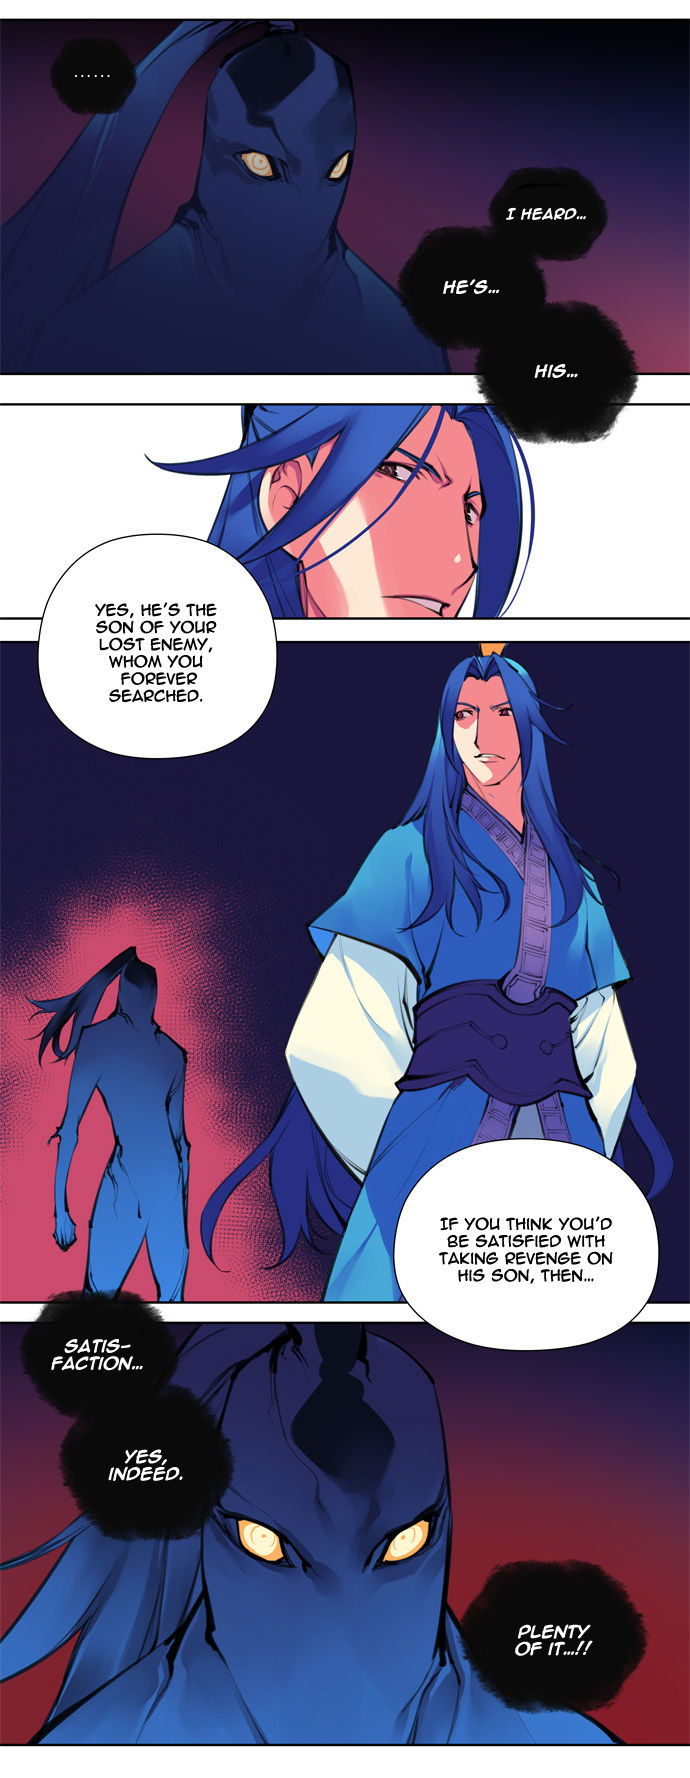 Marchen - The Embodiment of Tales Chapter 088 page 10